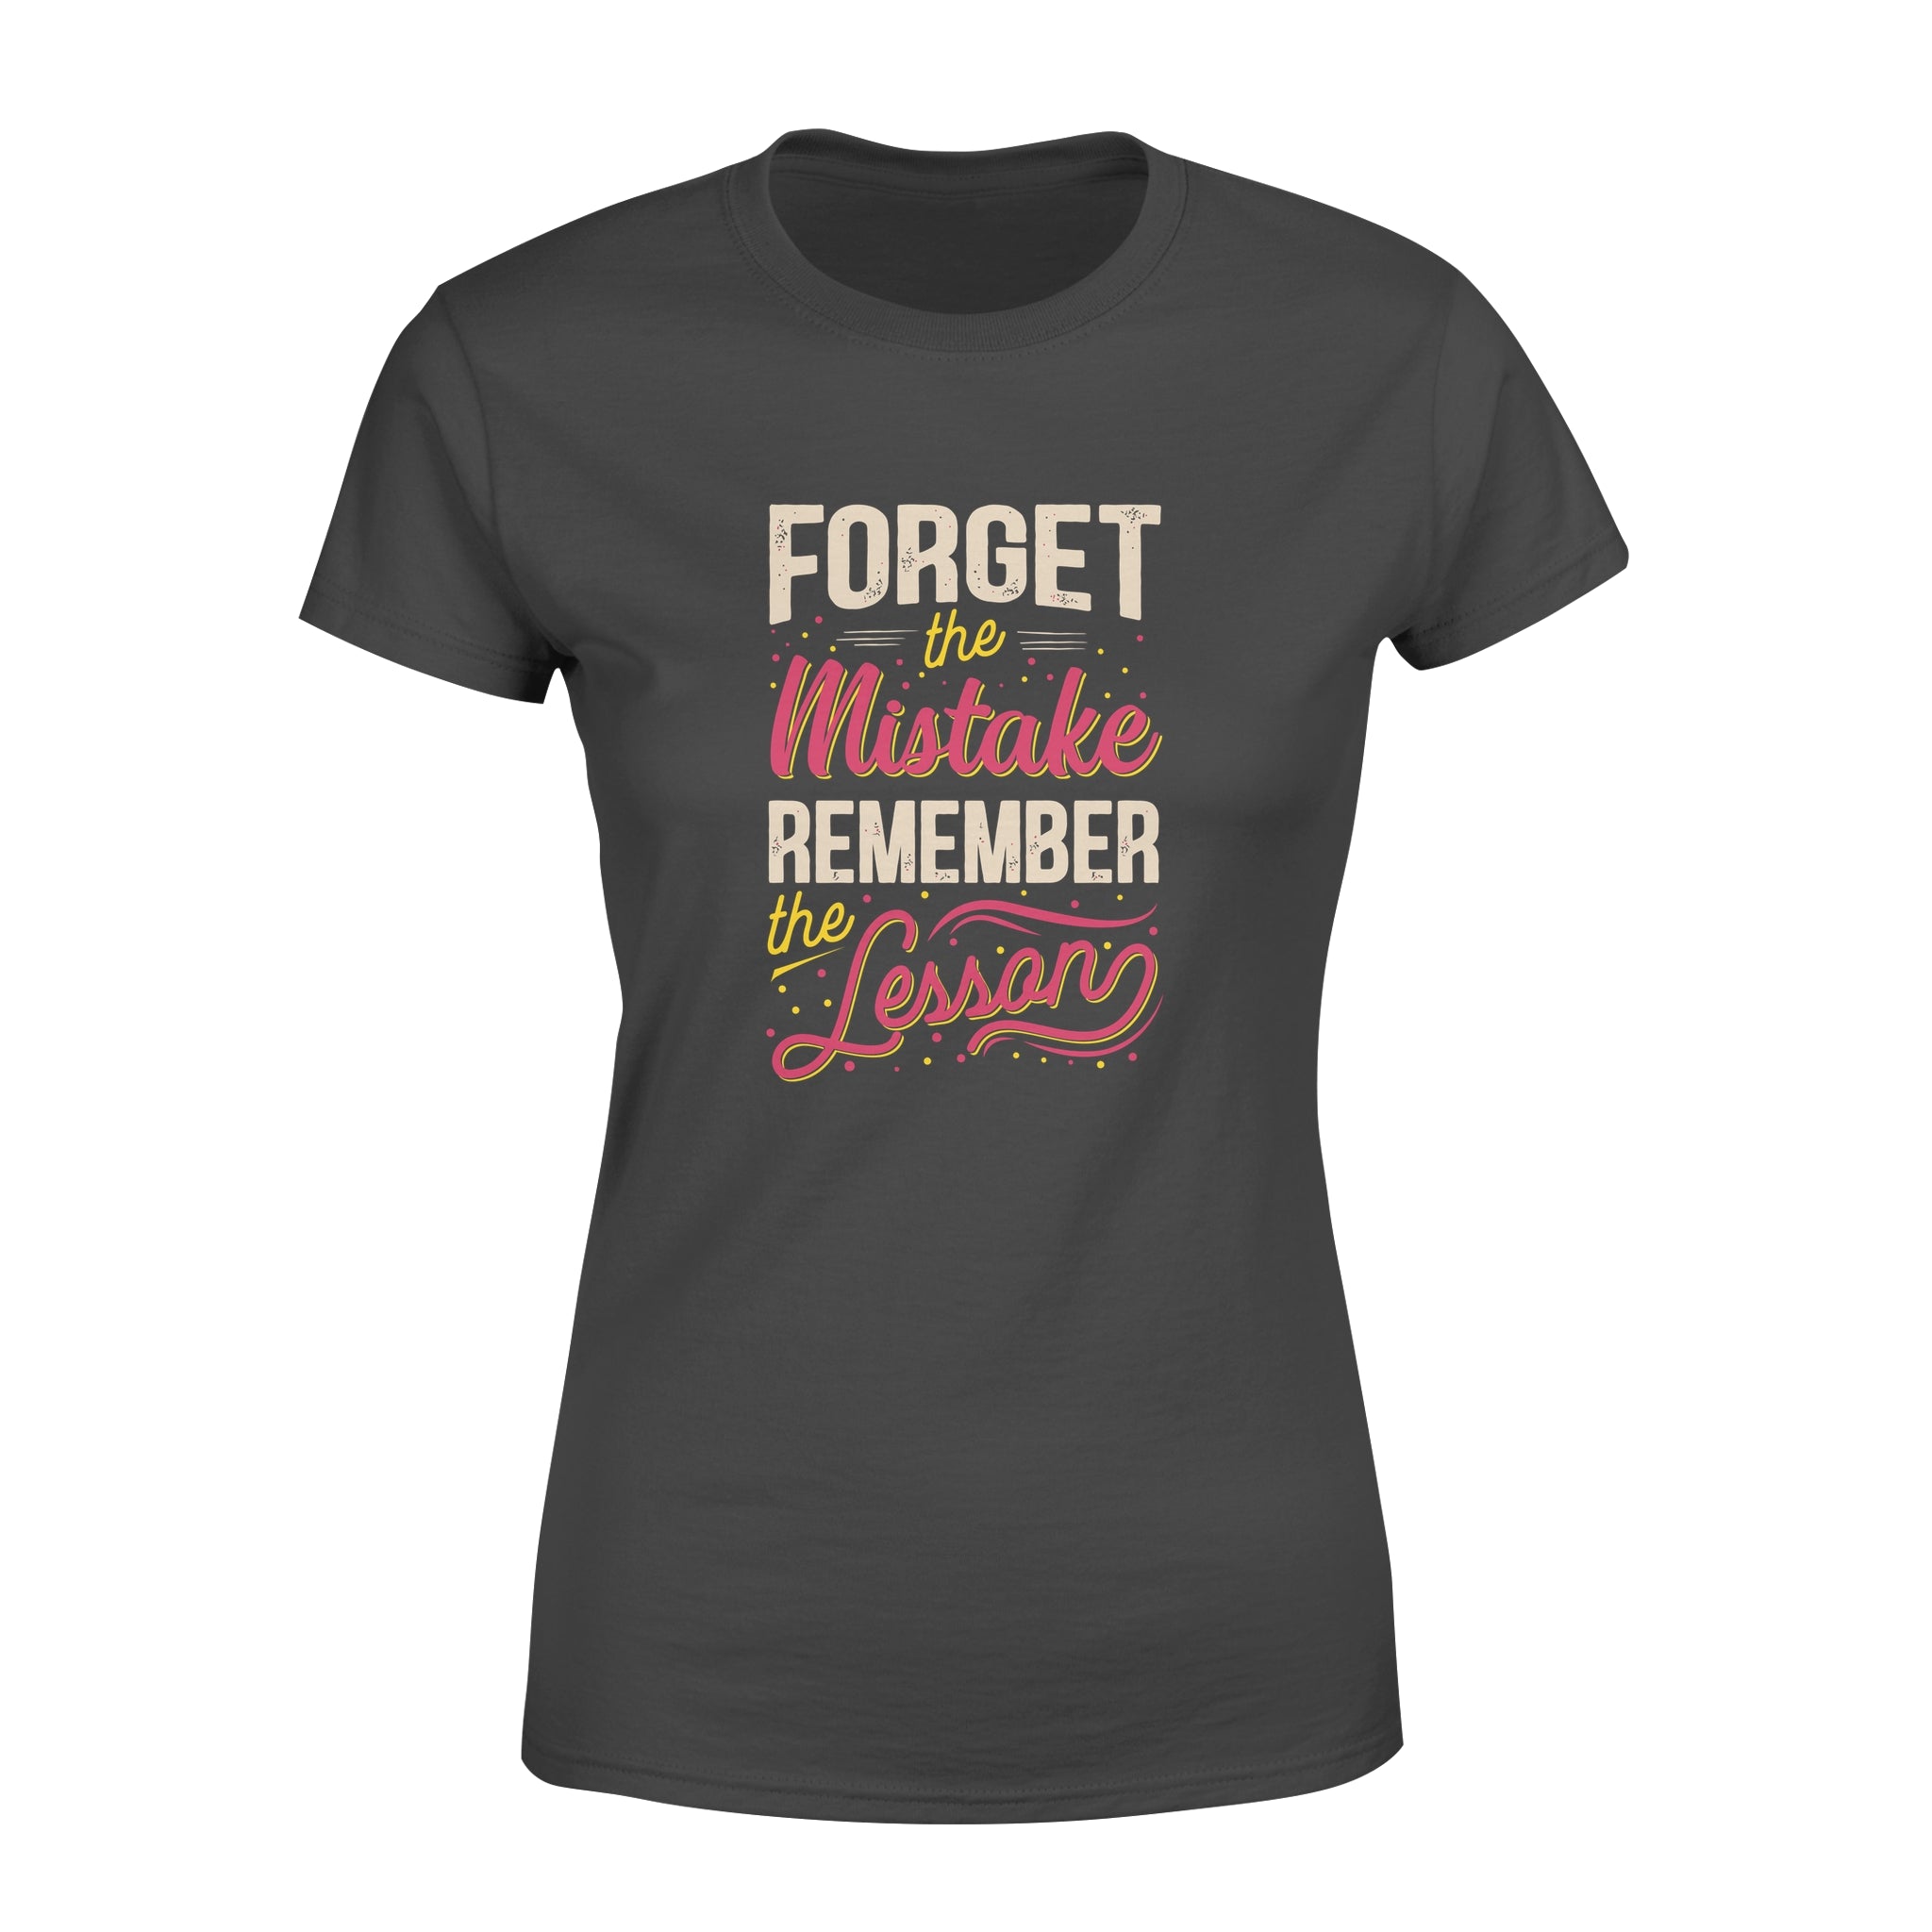 Forget The Mistake Remember The Lesson - Women's T-shirt